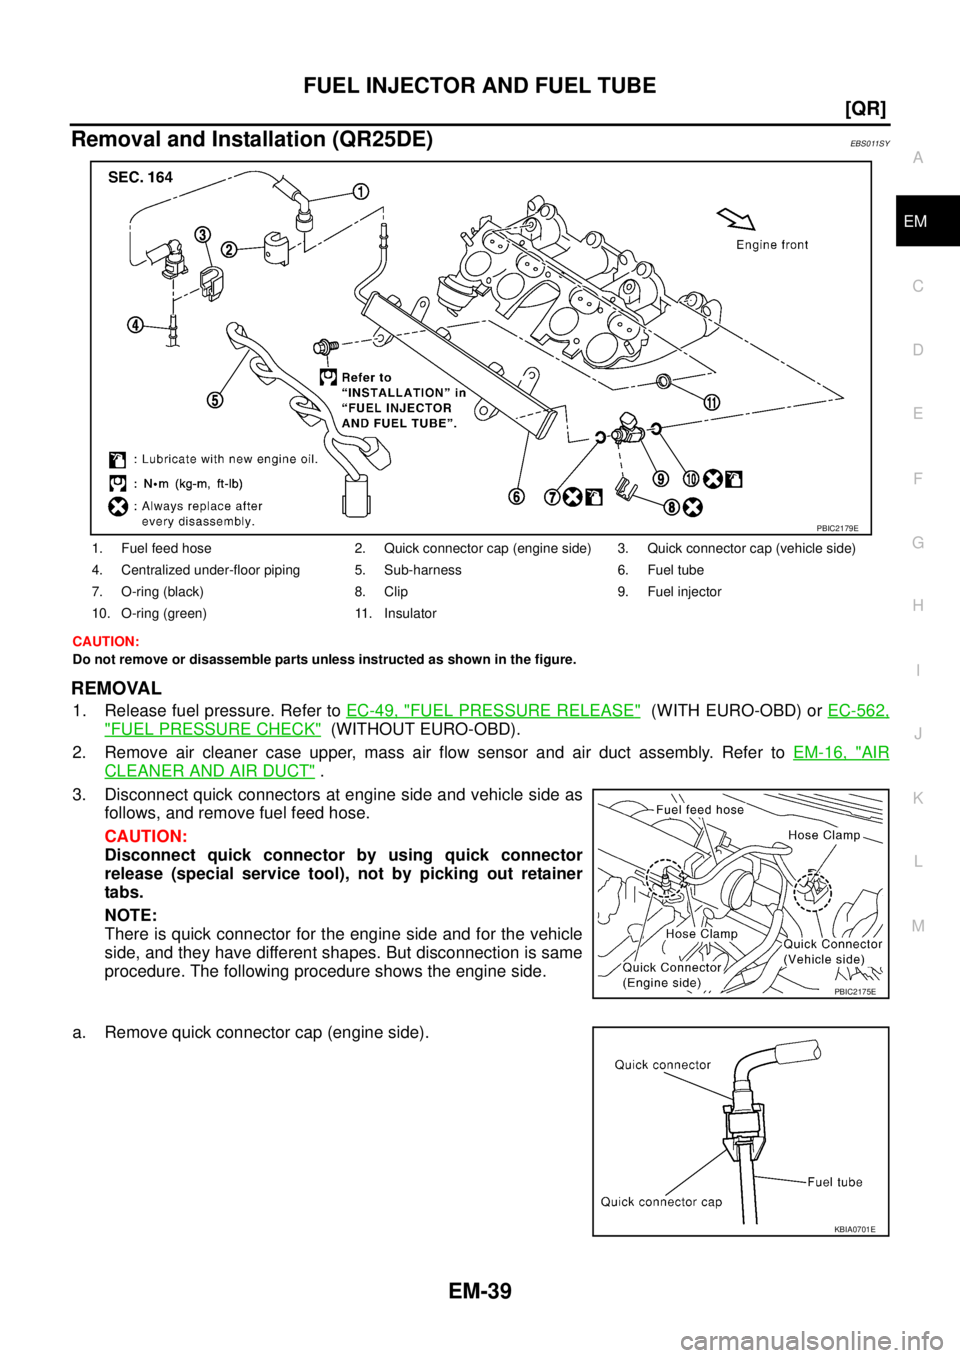 NISSAN X-TRAIL 2005  Service Repair Manual FUEL INJECTOR AND FUEL TUBE
EM-39
[QR]
C
D
E
F
G
H
I
J
K
L
MA
EM
 
Removal and Installation (QR25DE)EBS011SY
CAUTION:
Do not remove or disassemble parts unless instructed as shown in the figure.
REMOV